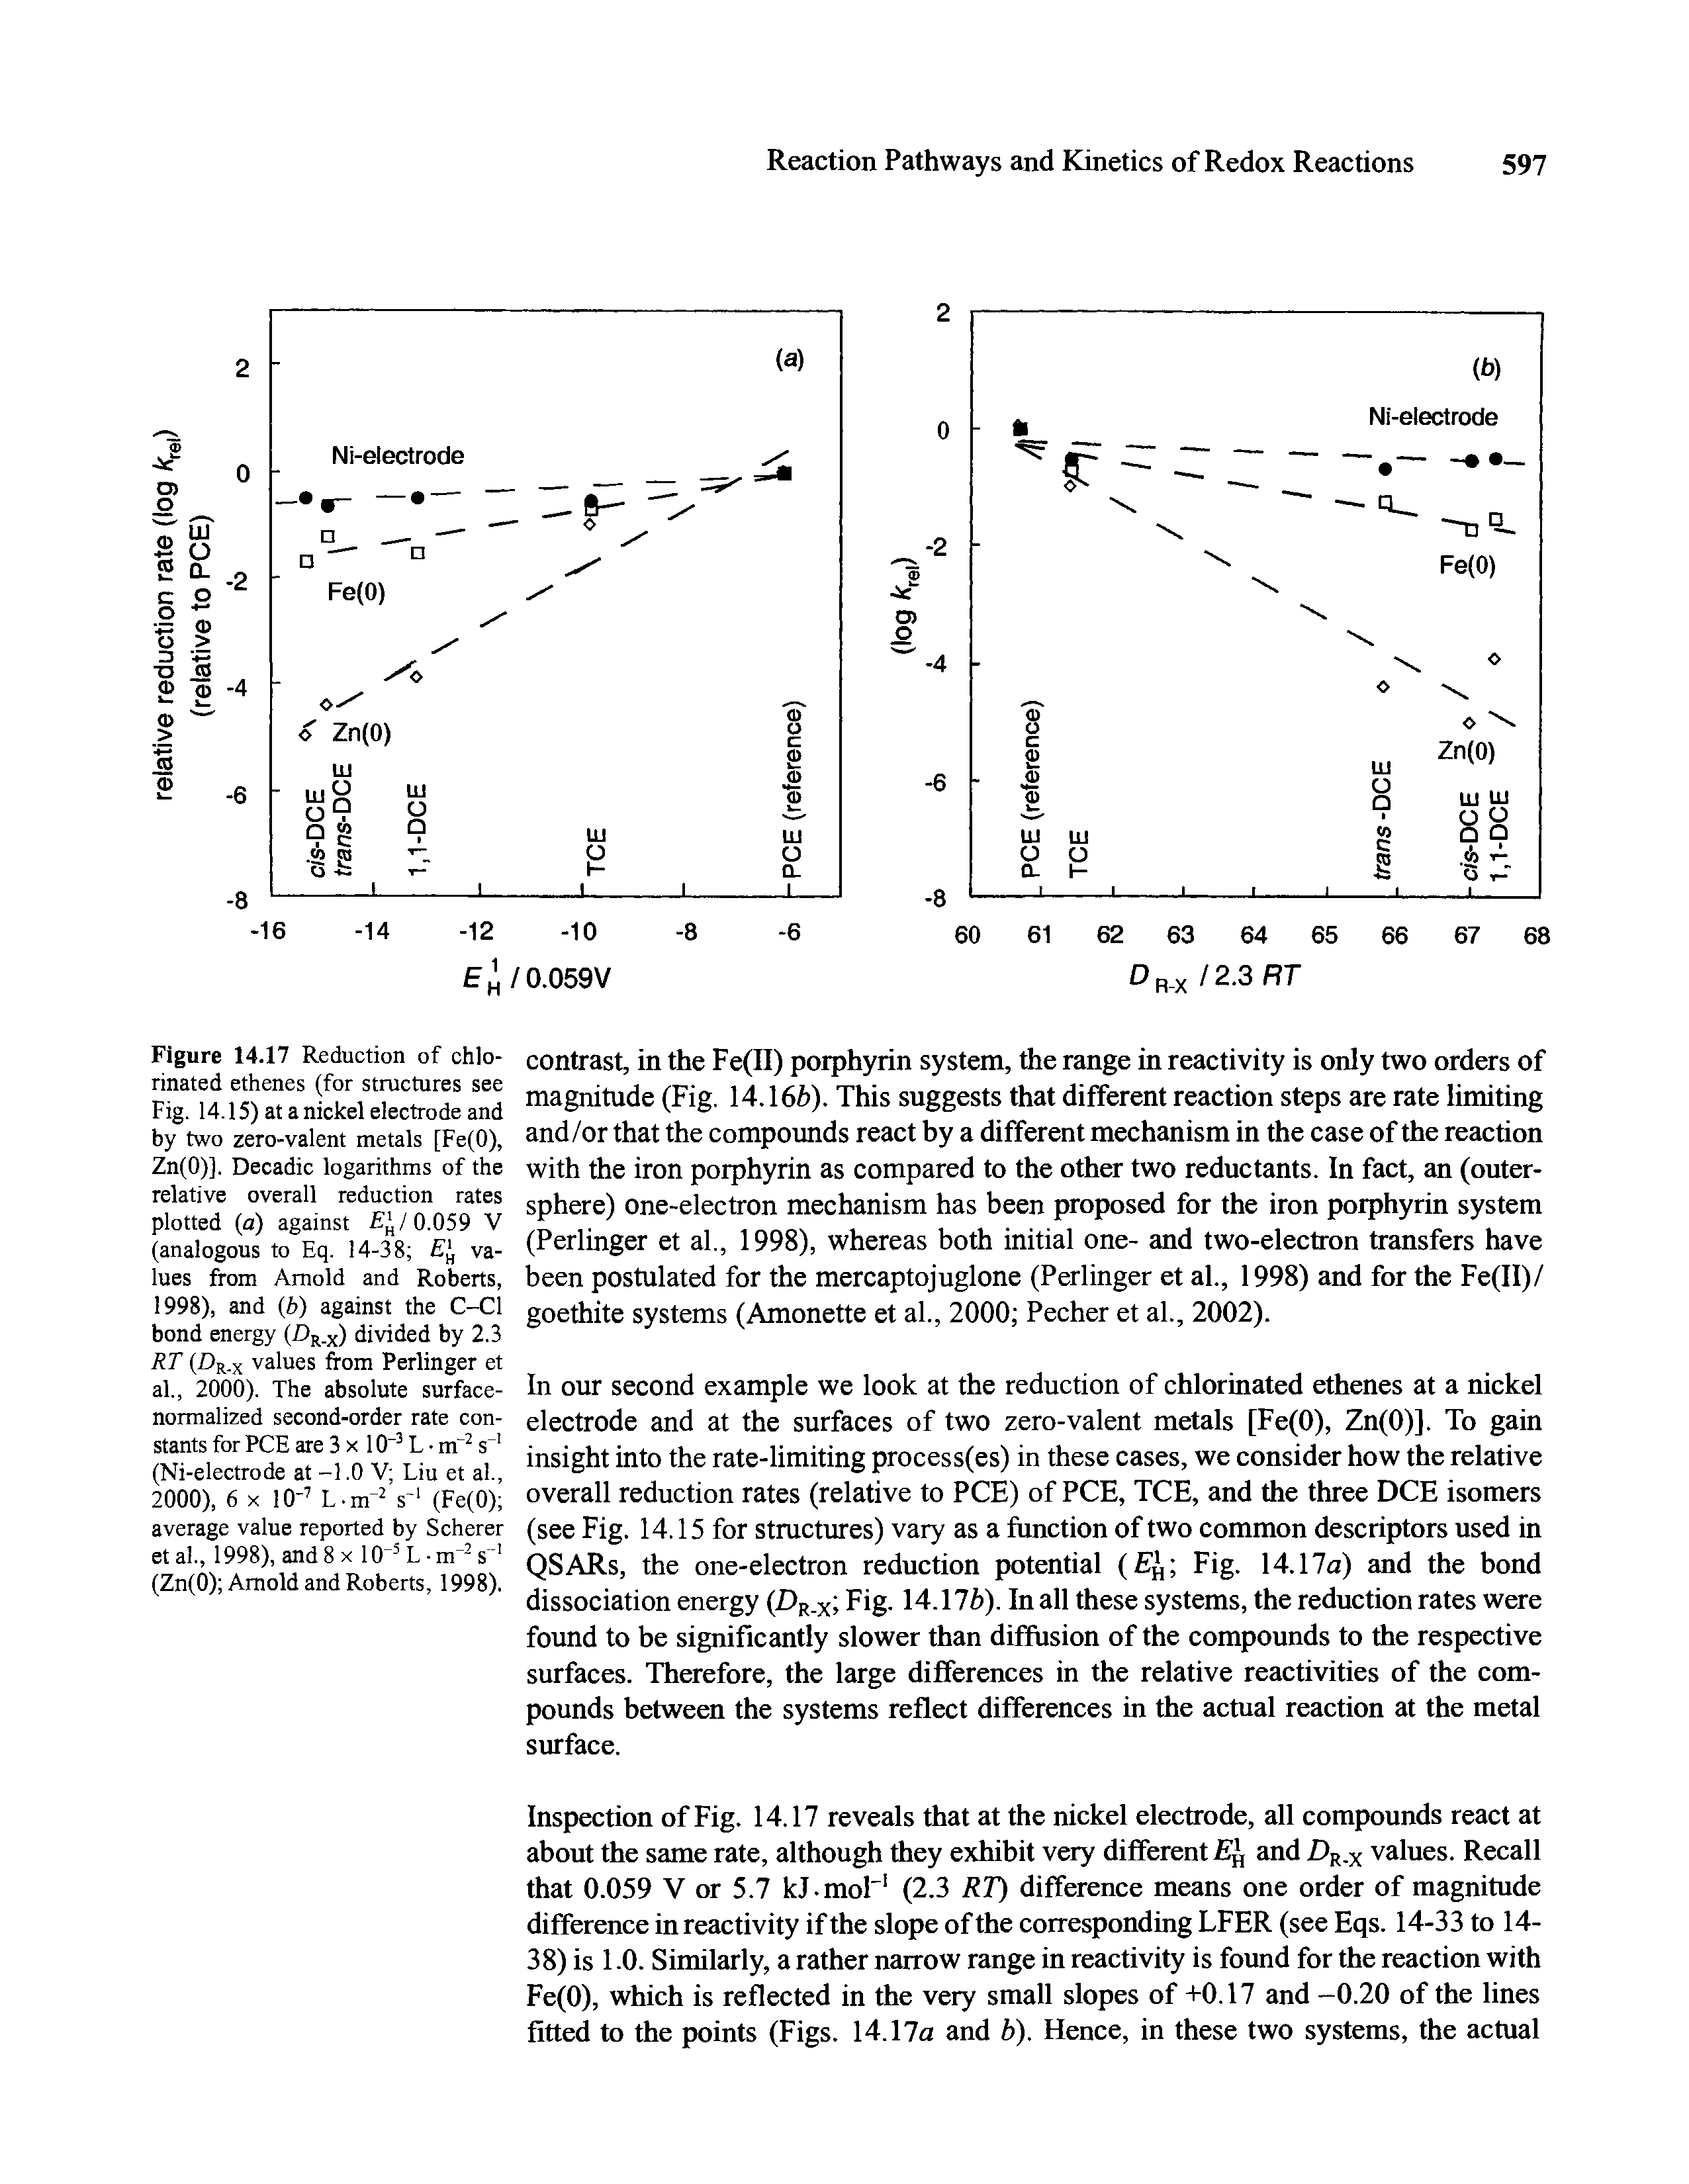 Figure 14.17 Reduction of chlorinated ethenes (for structures see Fig. 14.15) at a nickel electrode and by two zero-valent metals [Fe(0), Zn(0)]. Decadic logarithms of the relative overall reduction rates plotted (a) against / 0.059 V (analogous to Eq. 14-38 E H values from Arnold and Roberts, 1998), and (b) against the C-Cl bond energy (DR X) divided by 2.3 RT (Dr.x values from Perlinger et al., 2000). The absolute surface-normalized second-order rate constants for PCE are 3 x 10-3 L m 2 s I (Ni-electrode at -1.0 V Liu et al., 2000), 6 x 10-7 L-nr2 s 1 (Fe(0) average value reported by Scherer et al., 1998), and 8 x 10 5 L - nr2 s 1 (Zn(0) Arnold and Roberts, 1998).